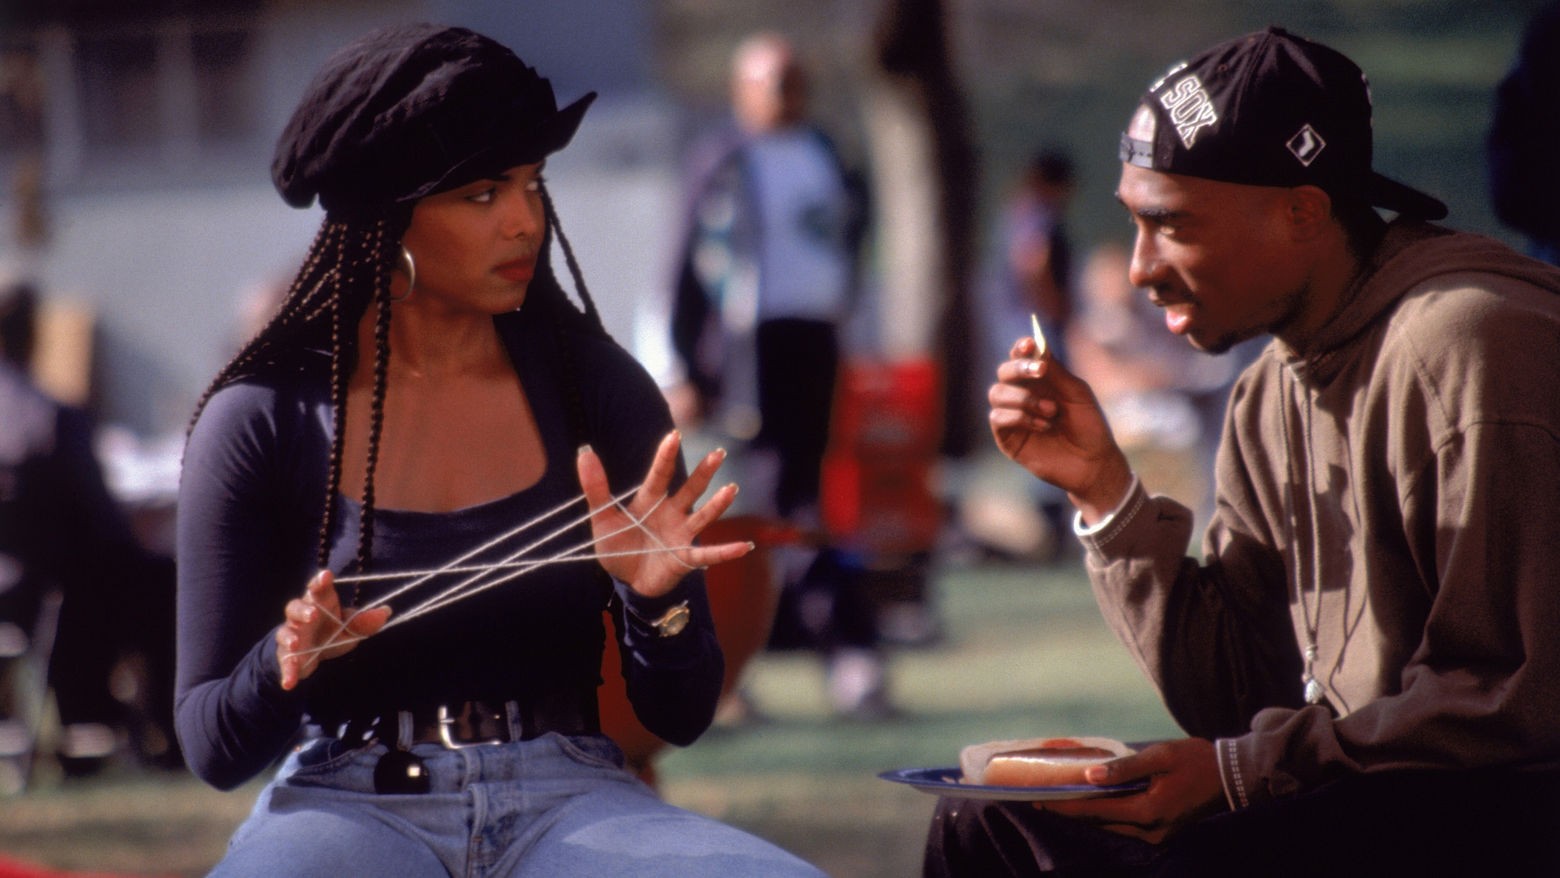 Janet Jackson and Tupac Shakur in a still from Poetic Justice 